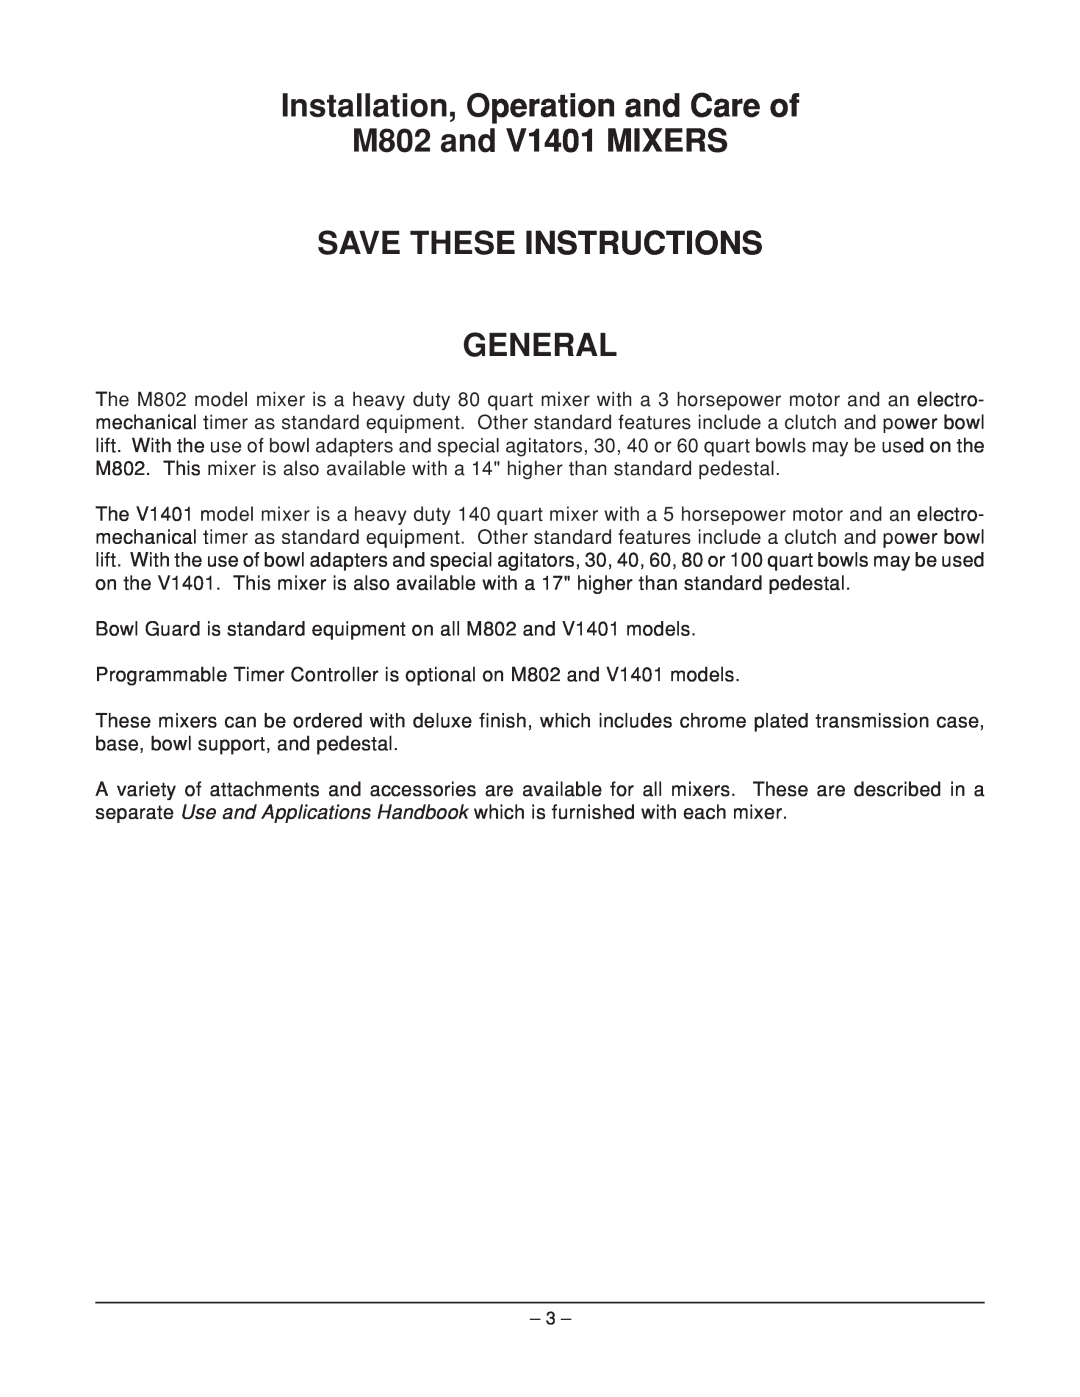 Hobart manual Installation, Operation and Care of M802 and V1401 MIXERS, Save These Instructions General 